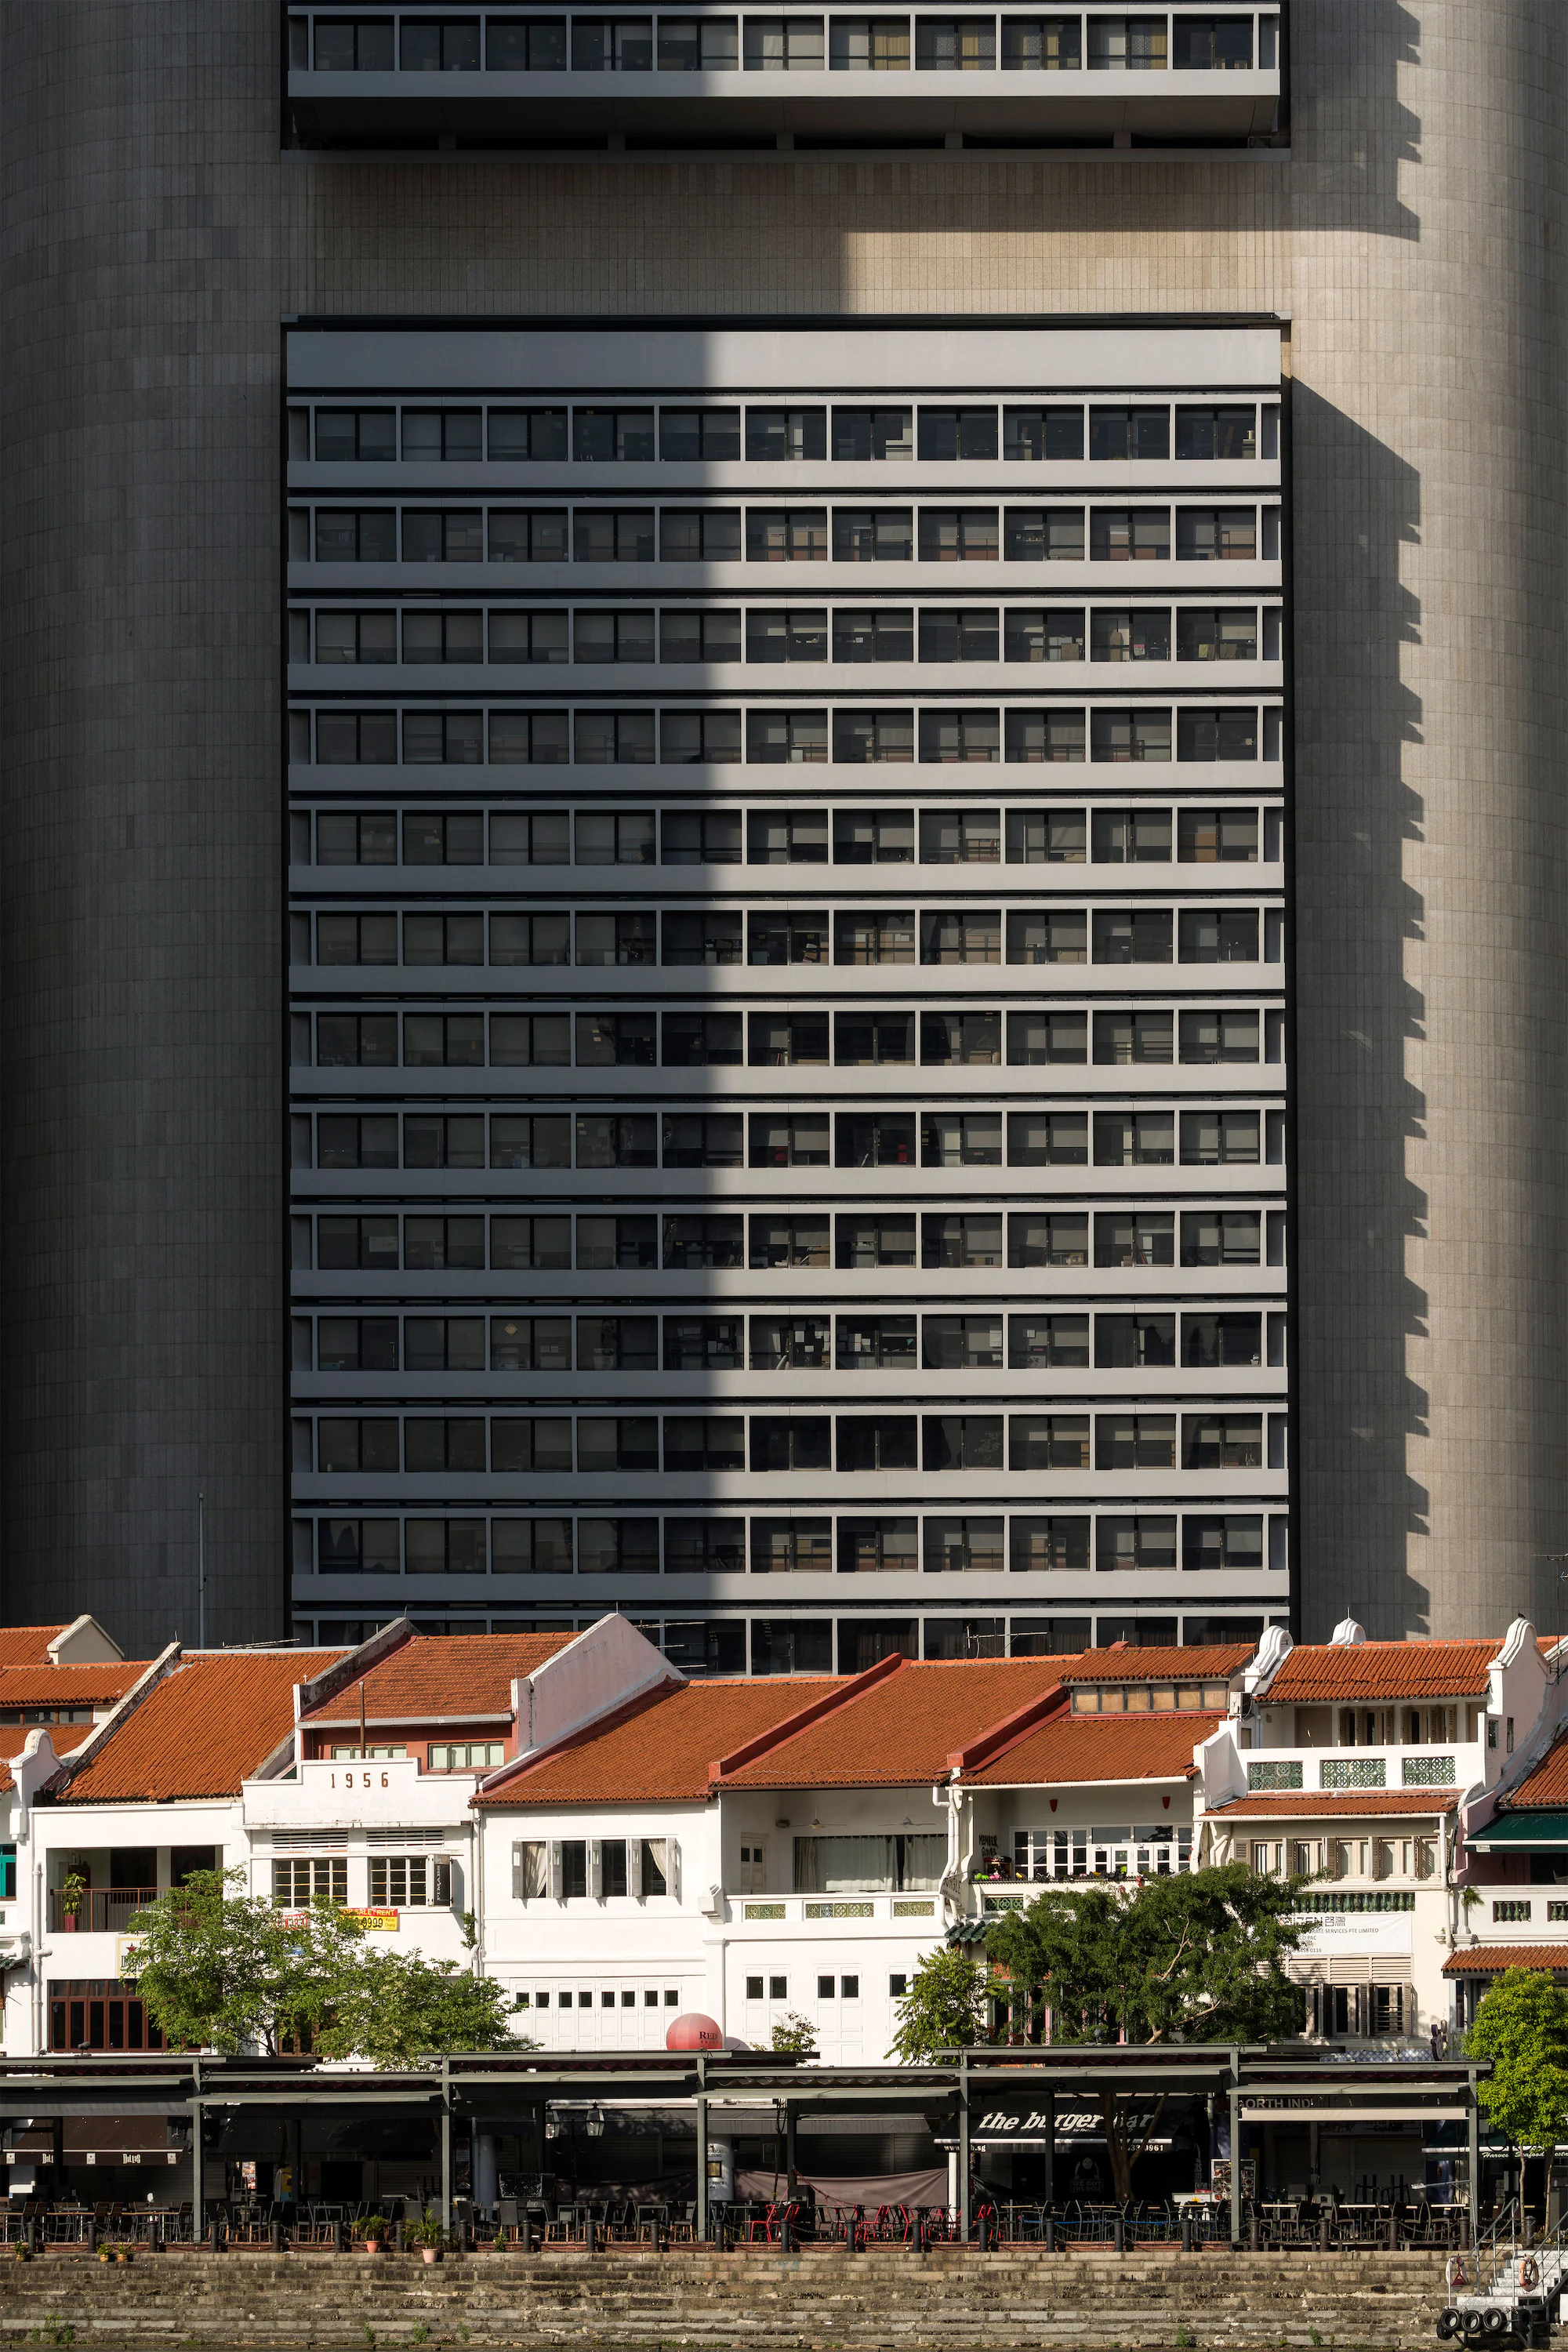 "Sony Alpha 7R IV highlights gradation and texture of building along Boat Quay. Perfect for architectural photograph